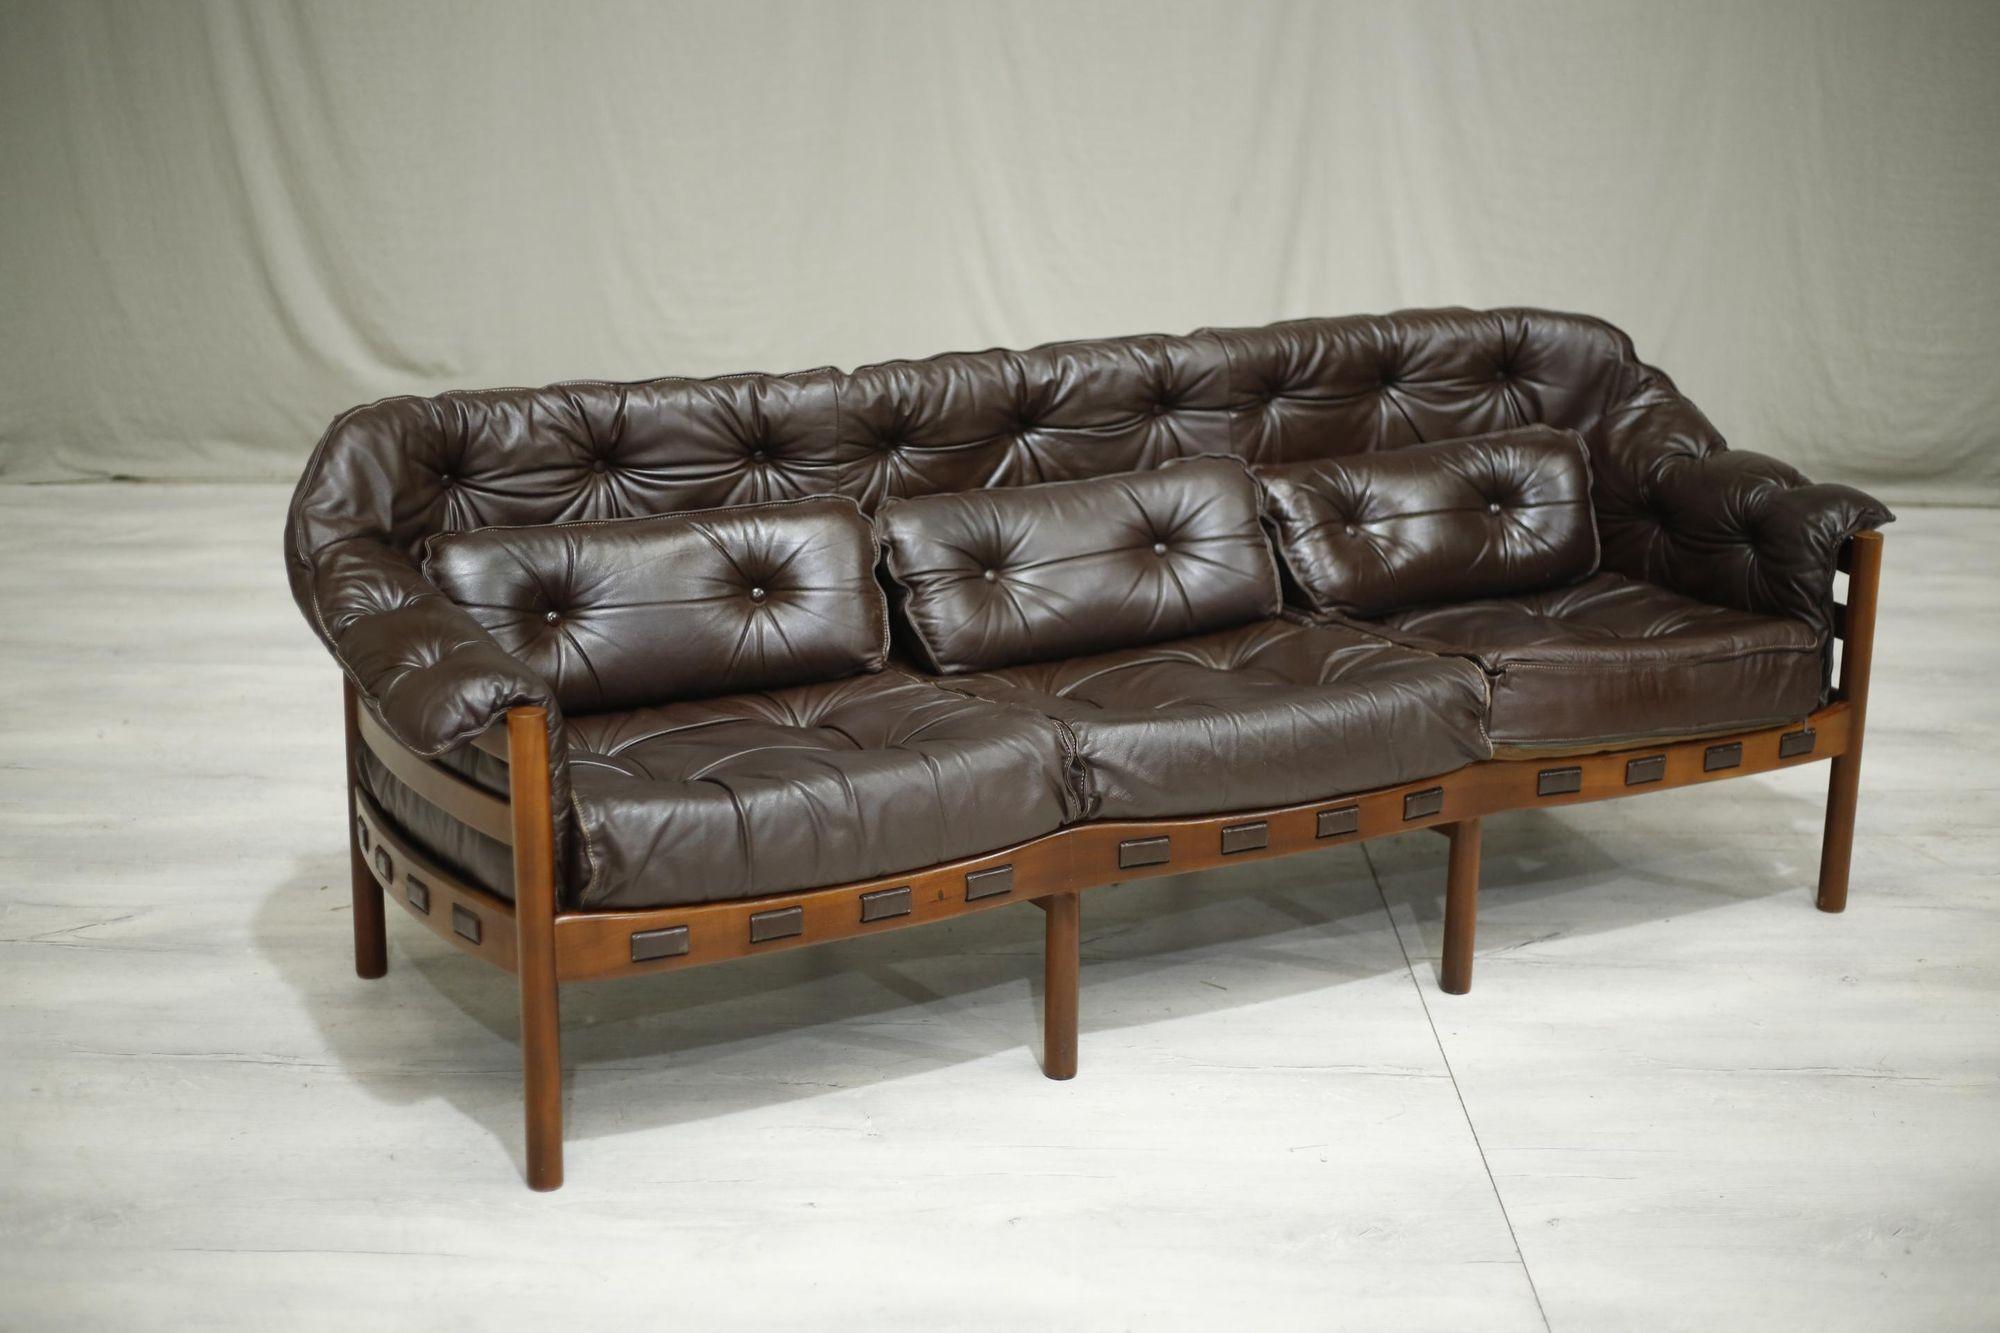 This is a very stylish mid century brown leather and teak sofa by Arne Norell. The quality is superb and you really sink into the seats comfortably. The design to me is ageless and will work well in a number of interiors. Good size and overall